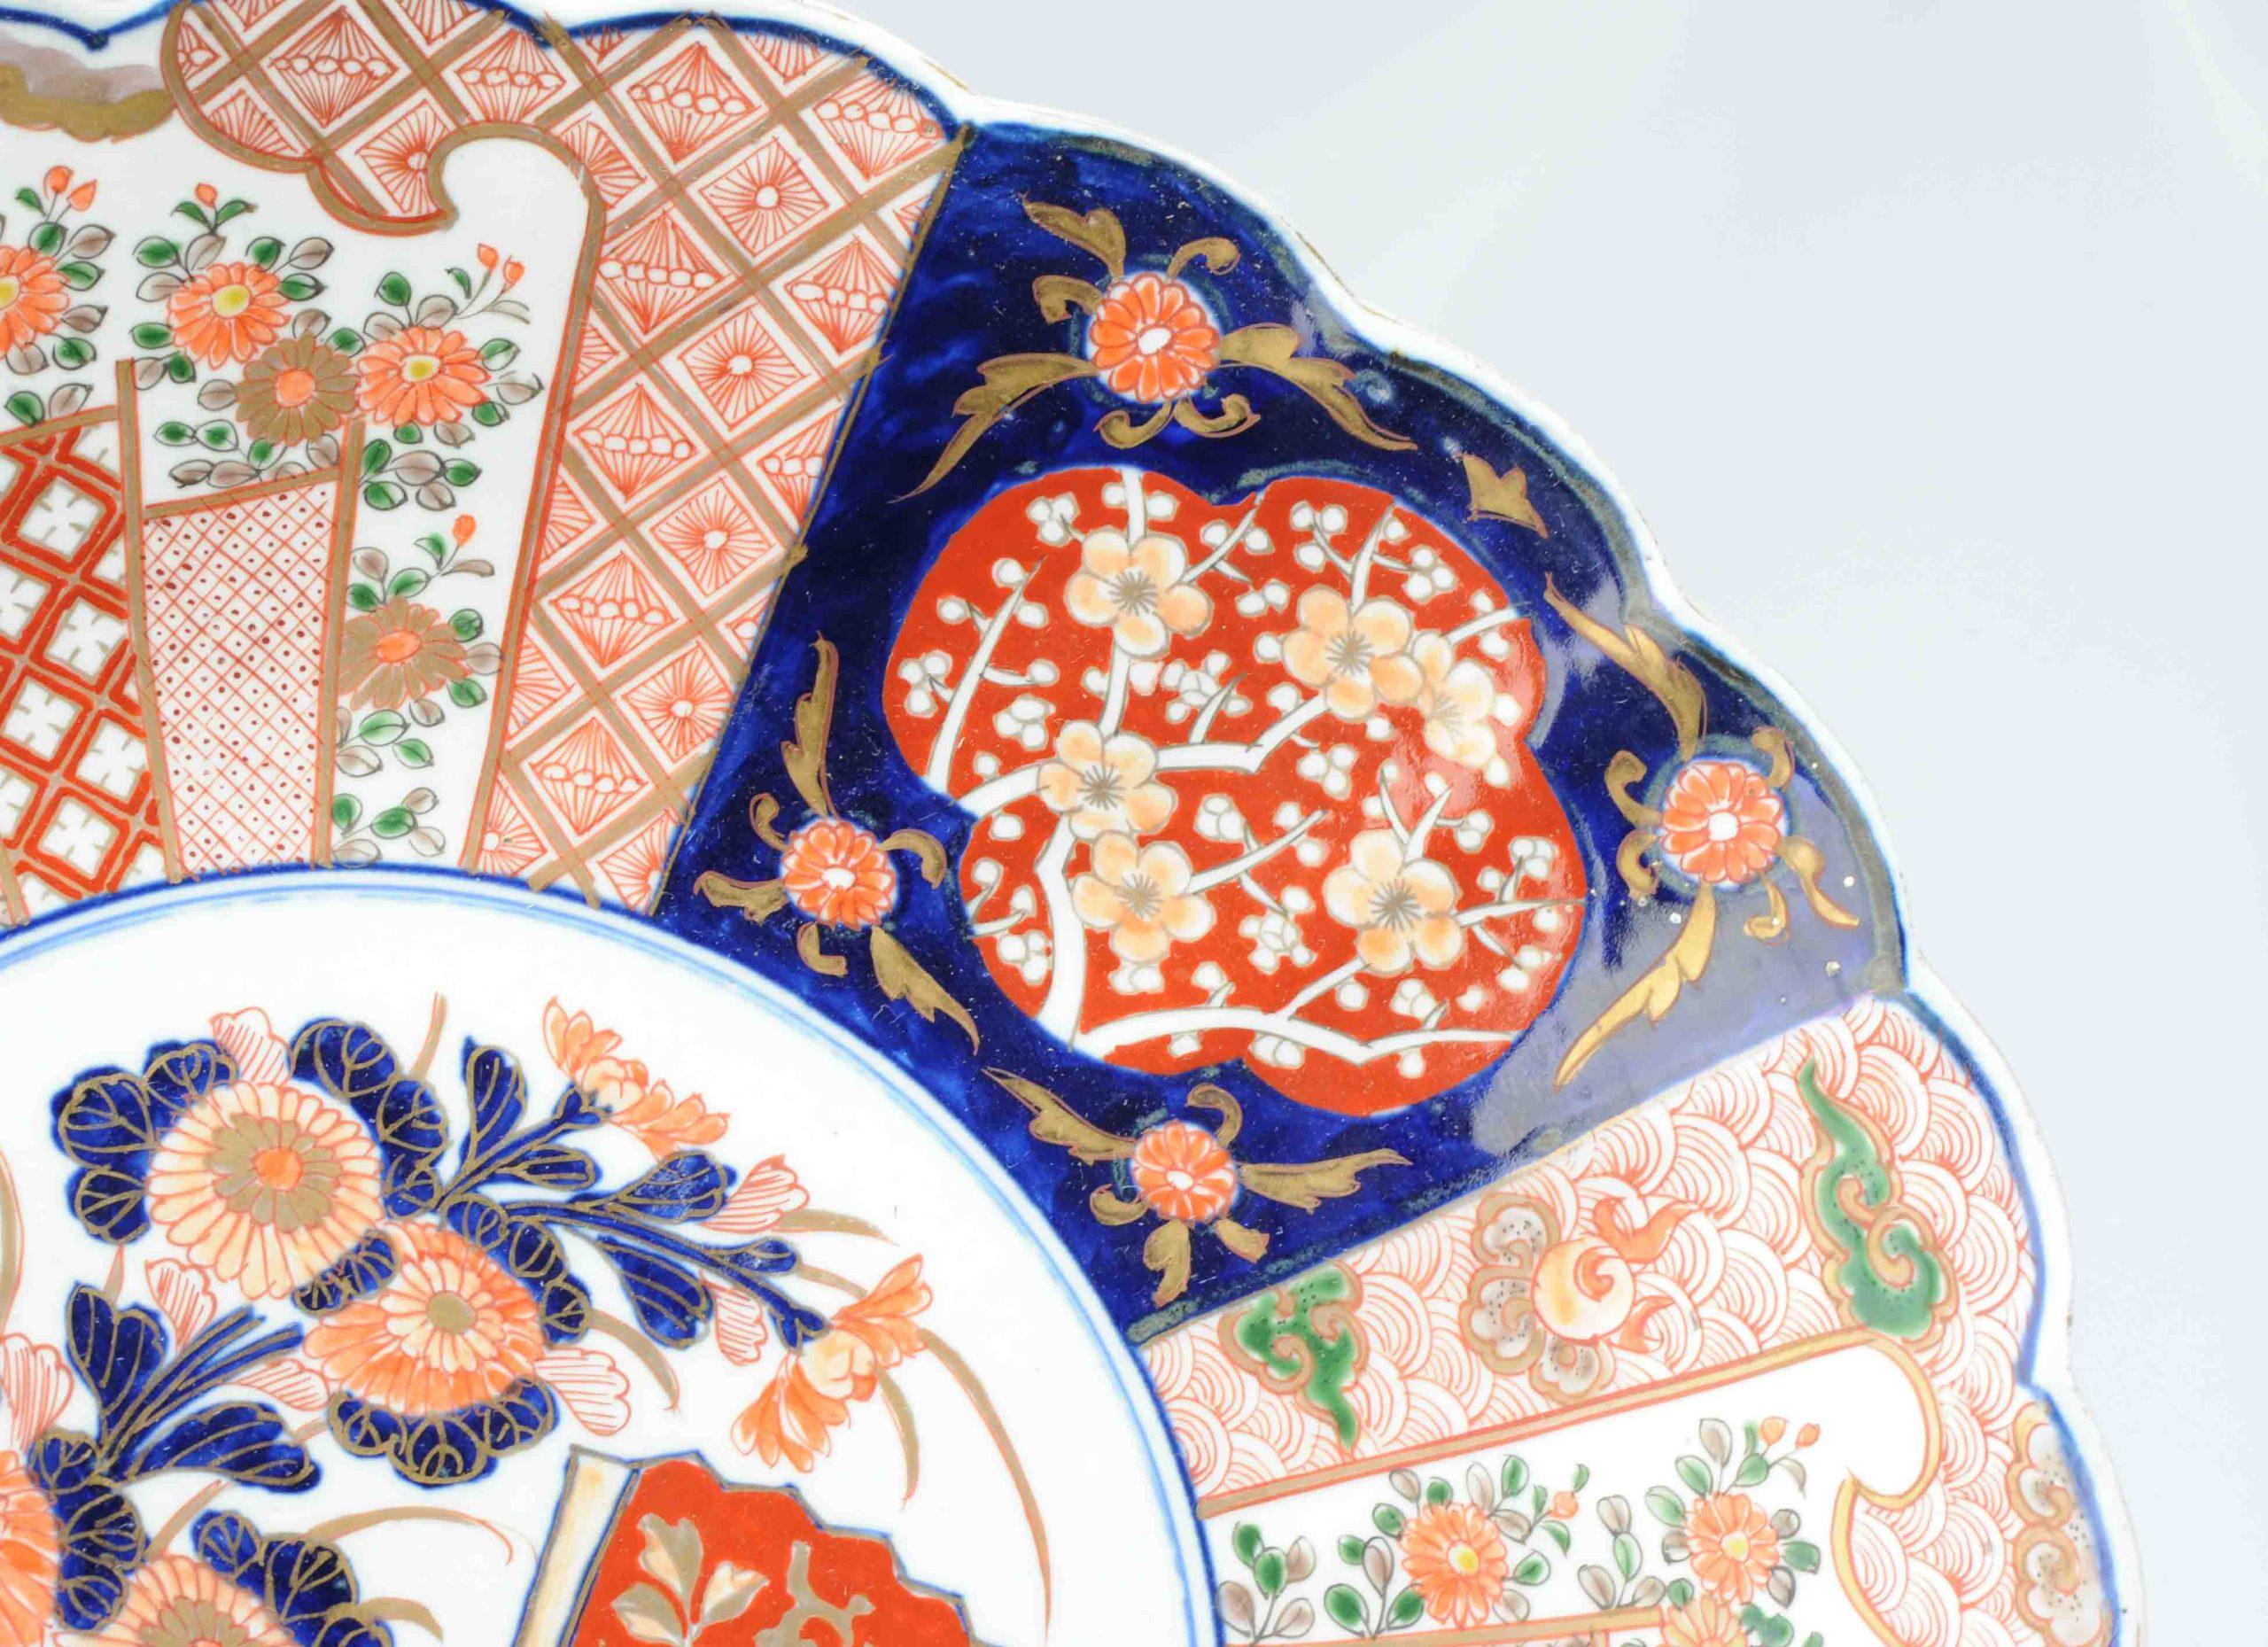 Antique Japanese Arita Imari Charger with Different Flowers, 19th Century In Good Condition For Sale In Amsterdam, Noord Holland